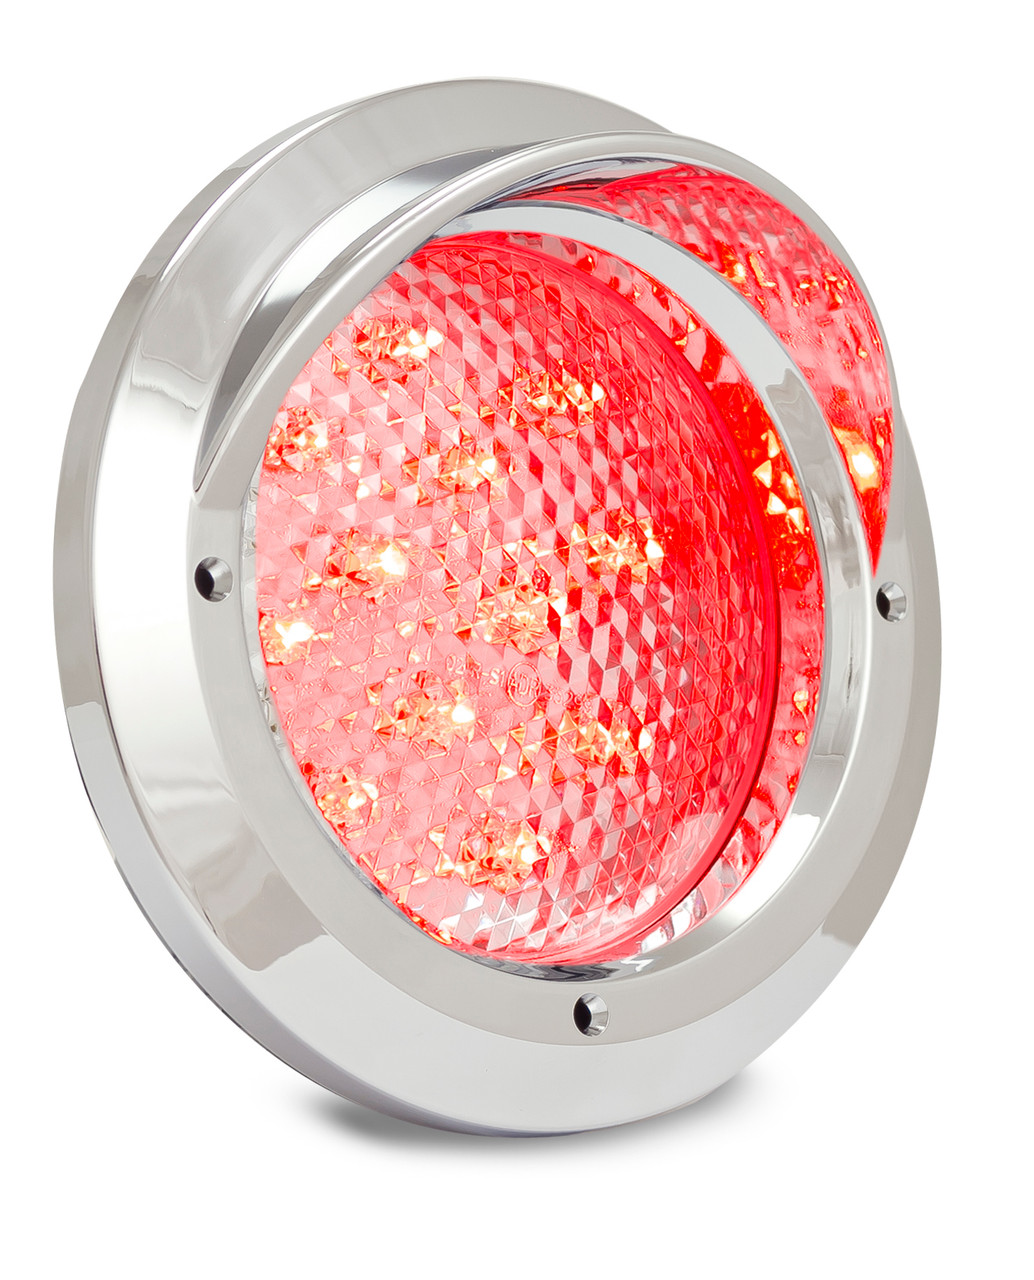 110CCRM - Chrome Truck Series. Chrome Hooded Recessed Design. Stop, Tail Light with Clear Lens. Shock, Dust and Water Proof. 5 Year Warranty. Includes Grommet, Chrome Hood and Plug. Autolamps. Ultimate LED